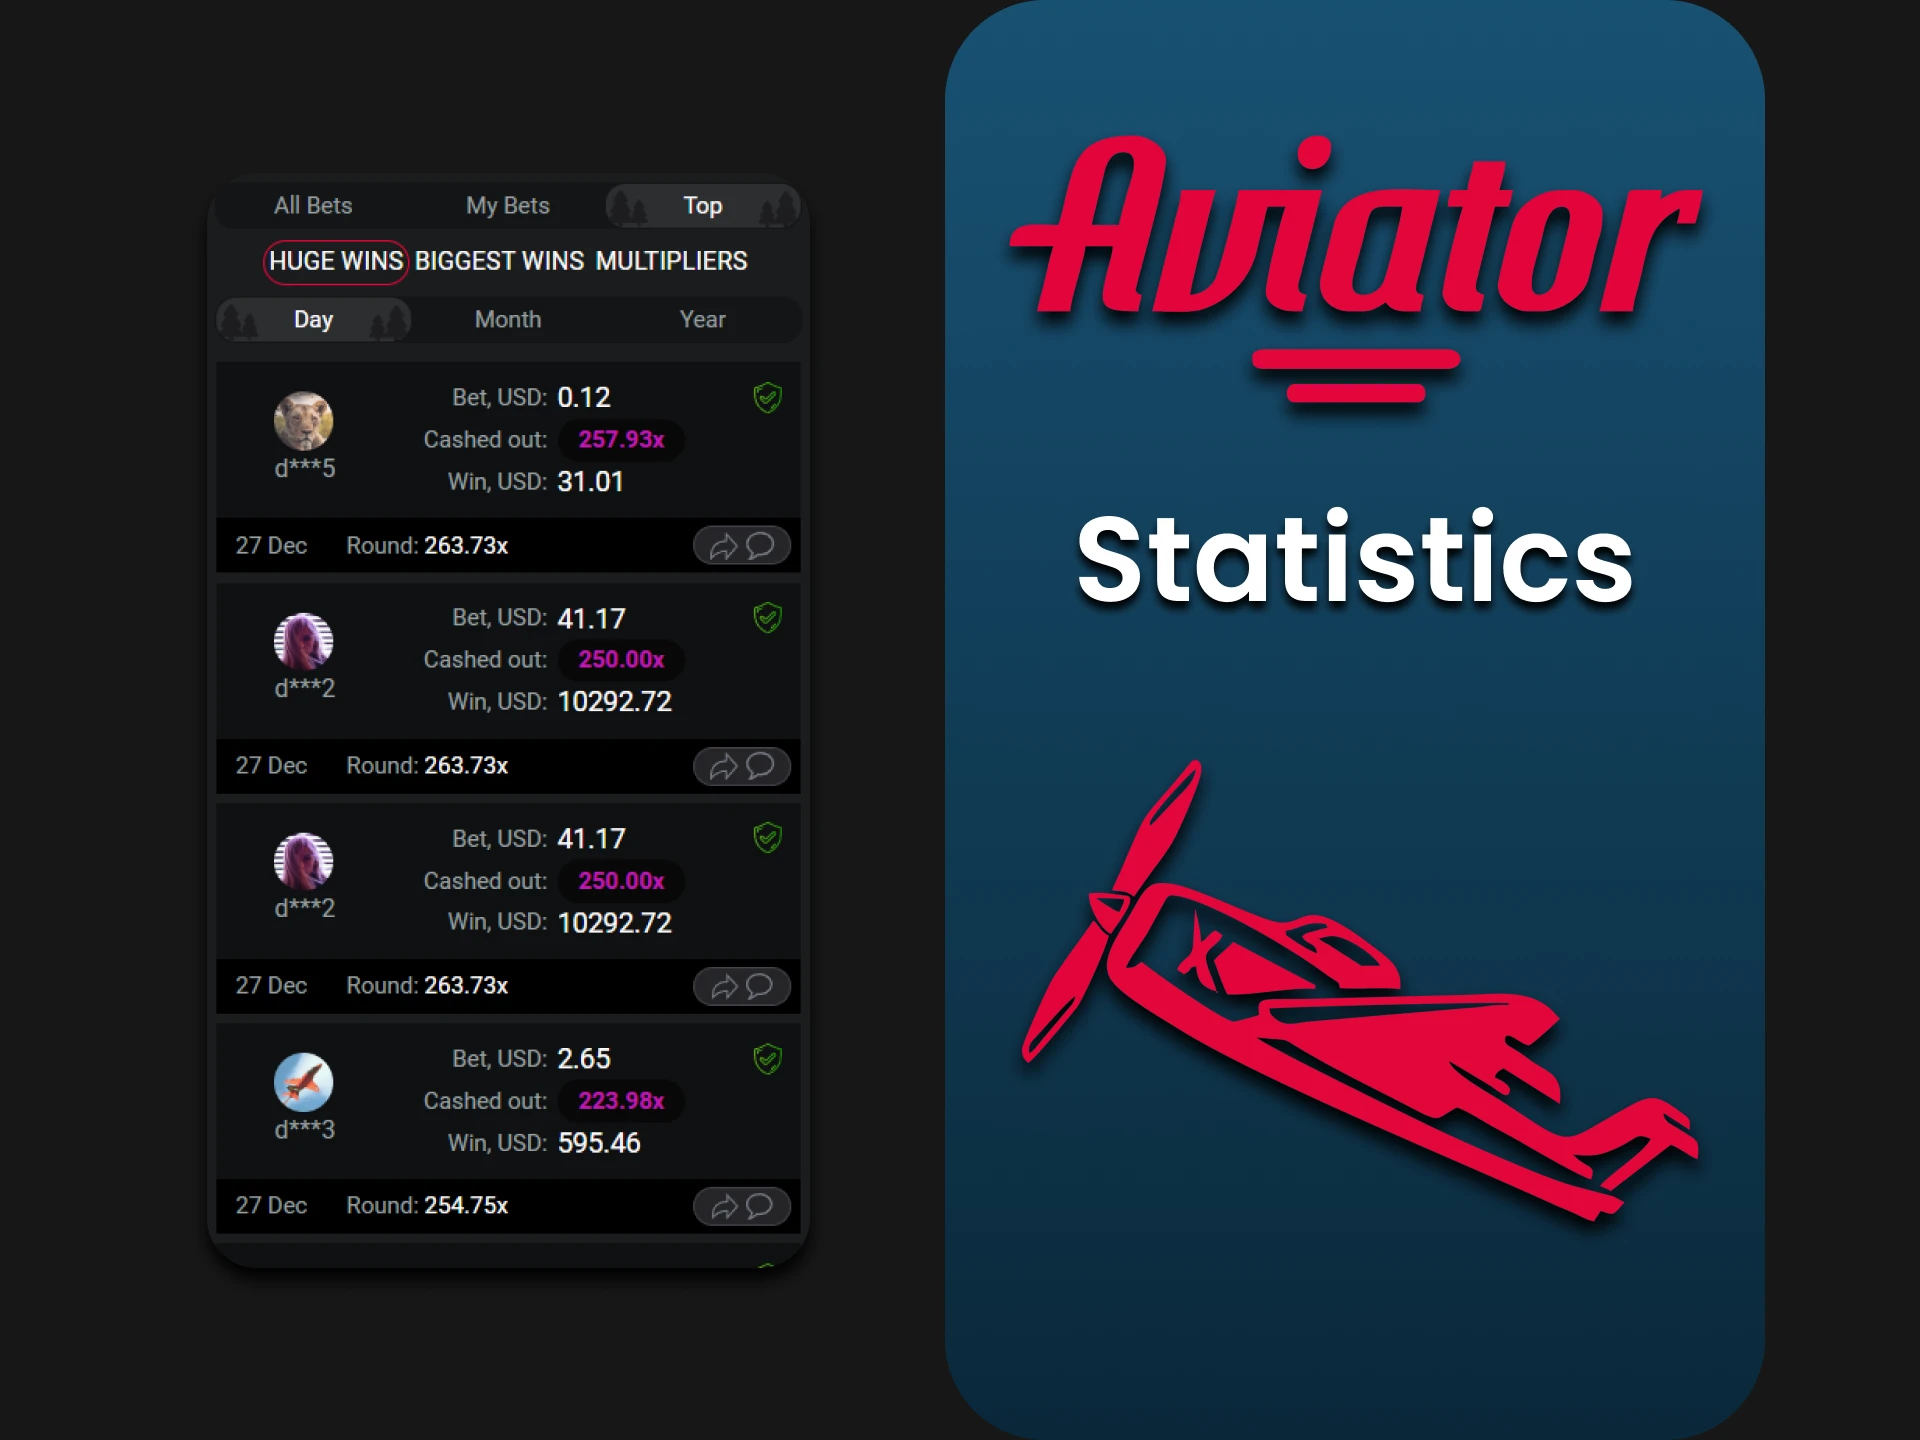 You can always study your statistics in the Aviator game.